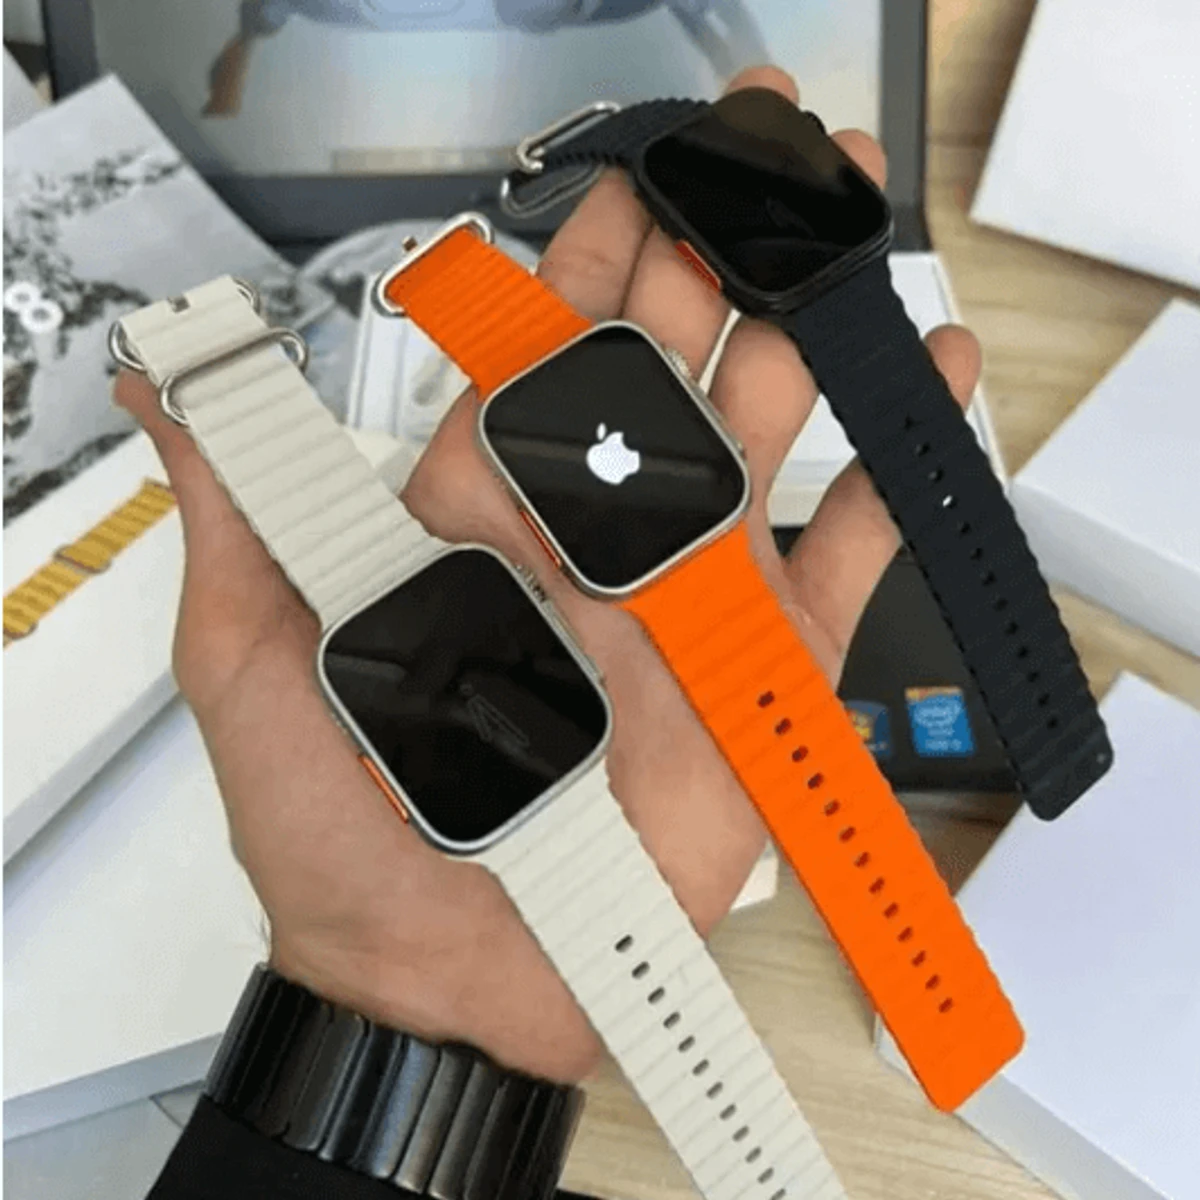 Watch 8 Ultra ( With apple logo )